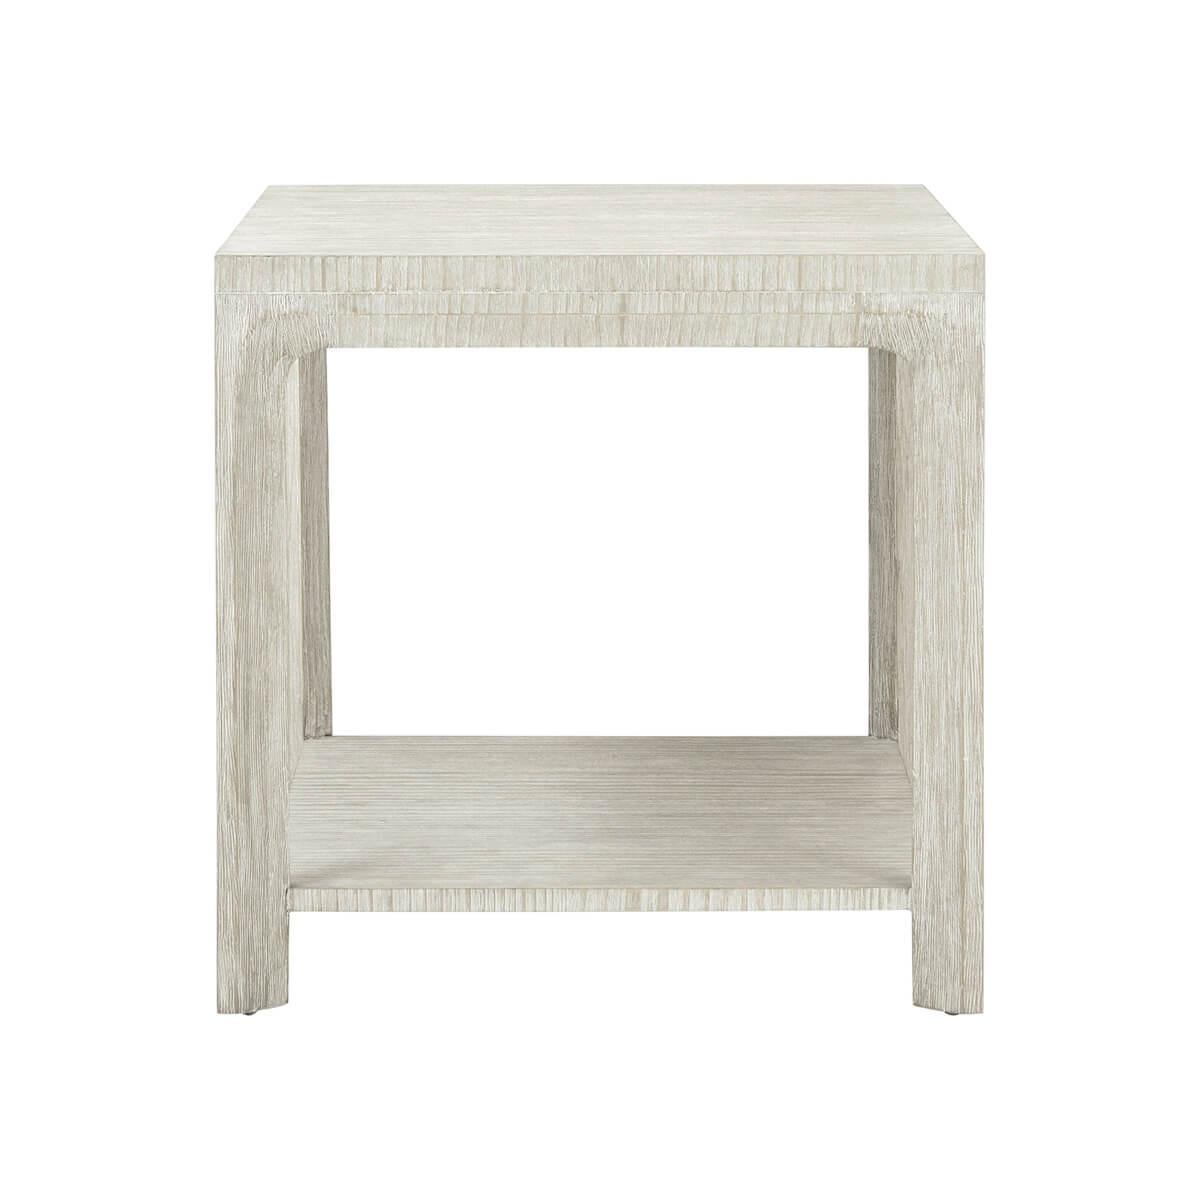 A four-legged wire-brushed cerused pine side table is supported by a bevel-shaped cross section and seen here in our Sea Salt finish.

Dimensions: 24